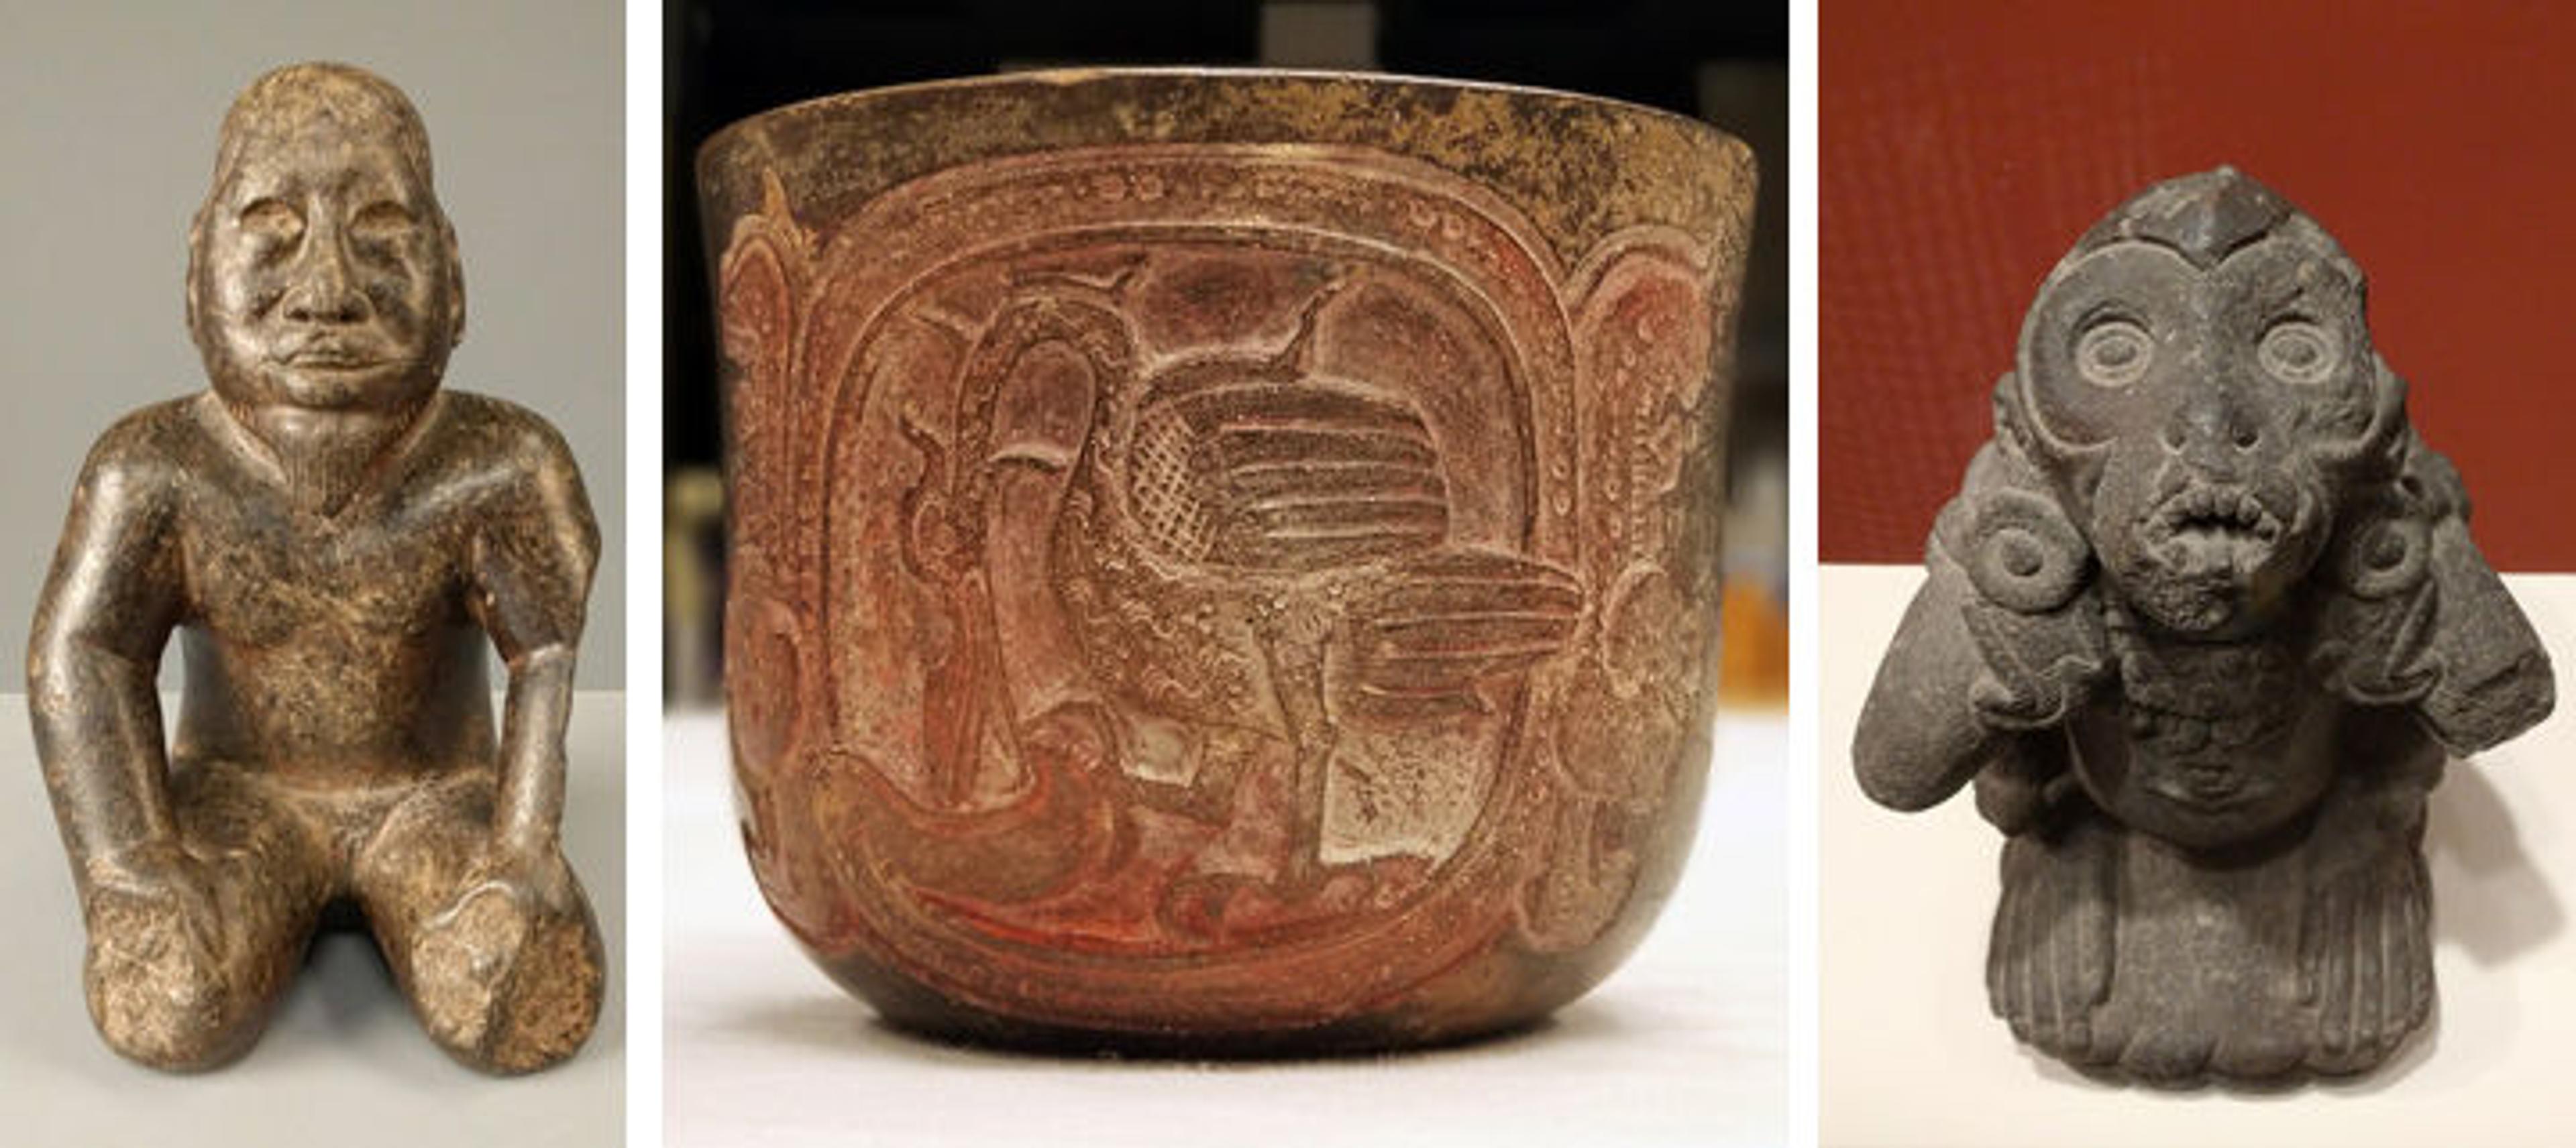 Two figural sculptures and a drinking vessel from The Met's collection of Mexican art